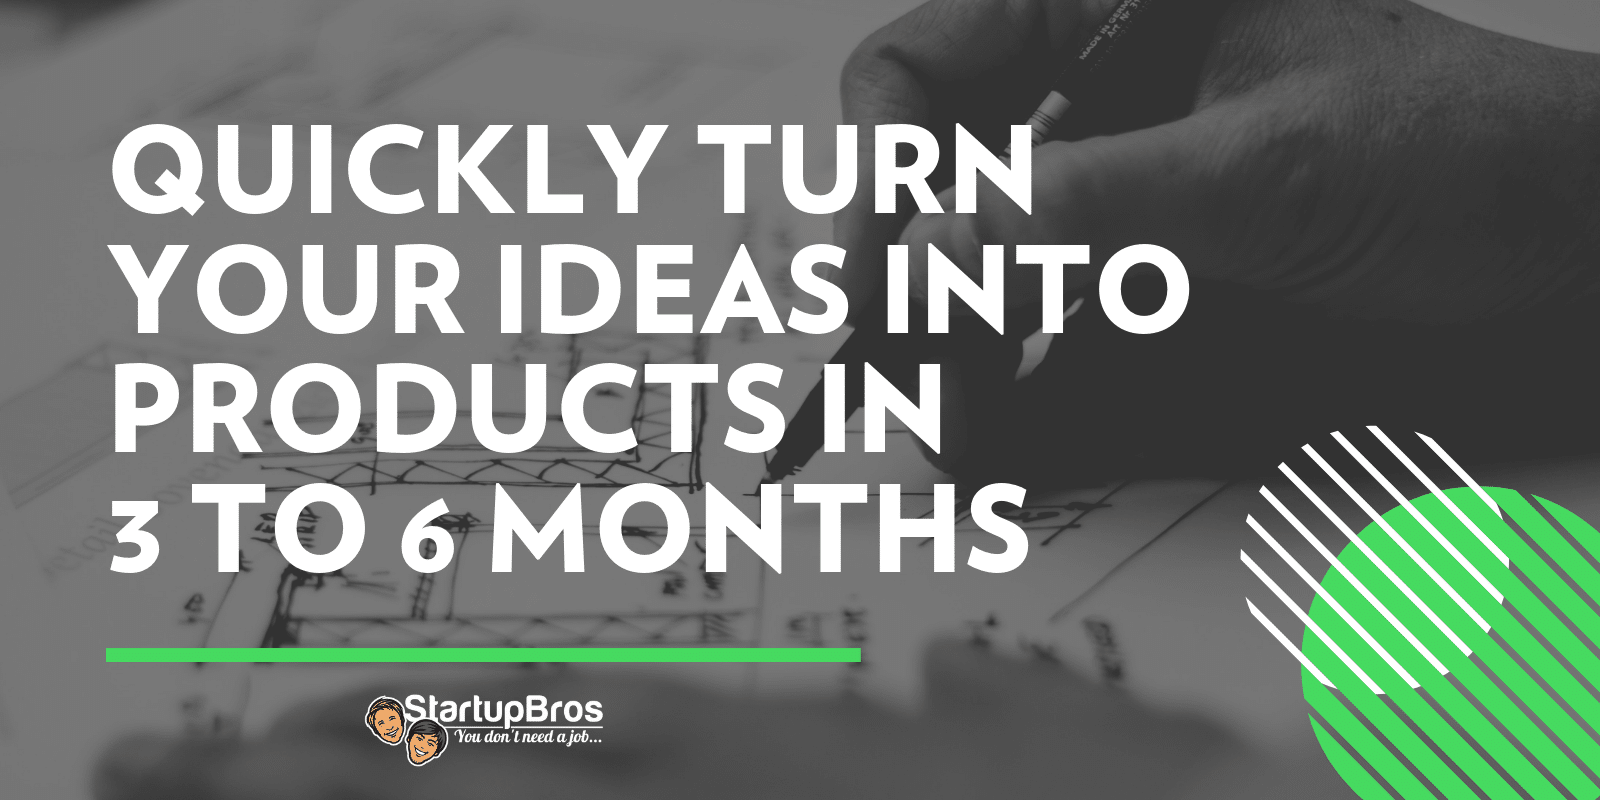 how to quickly Turn Your Ideas Into Products in 3 to 6 months